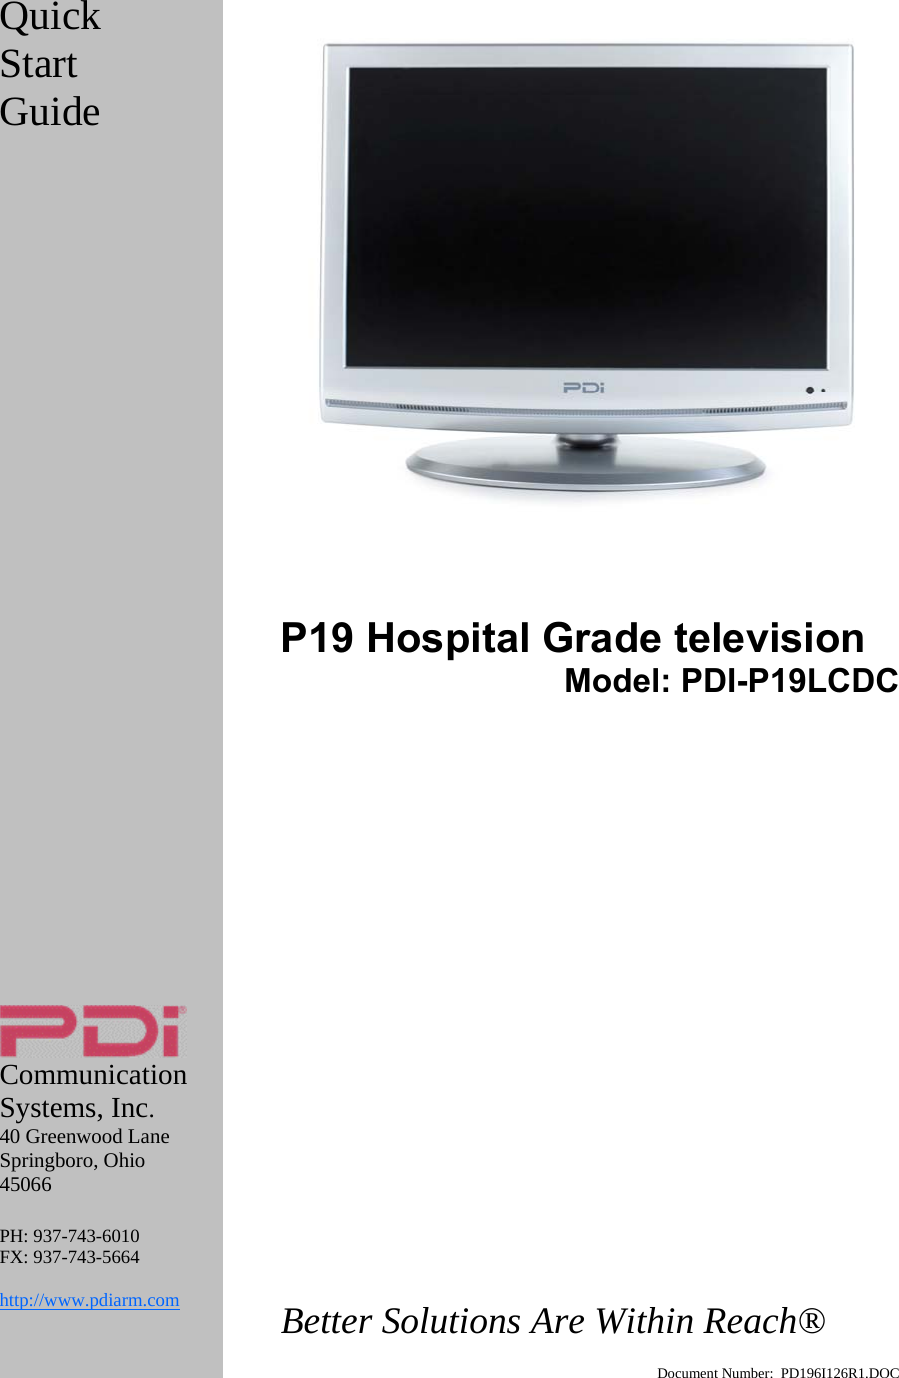 Quick Start Guide                            Communication Systems, Inc. 40 Greenwood Lane Springboro, Ohio 45066  PH: 937-743-6010 FX: 937-743-5664  http://www.pdiarm.com        P19 Hospital Grade television Model: PDI-P19LCDC               Better Solutions Are Within Reach®  Document Number:  PD196I126R1.DOC  